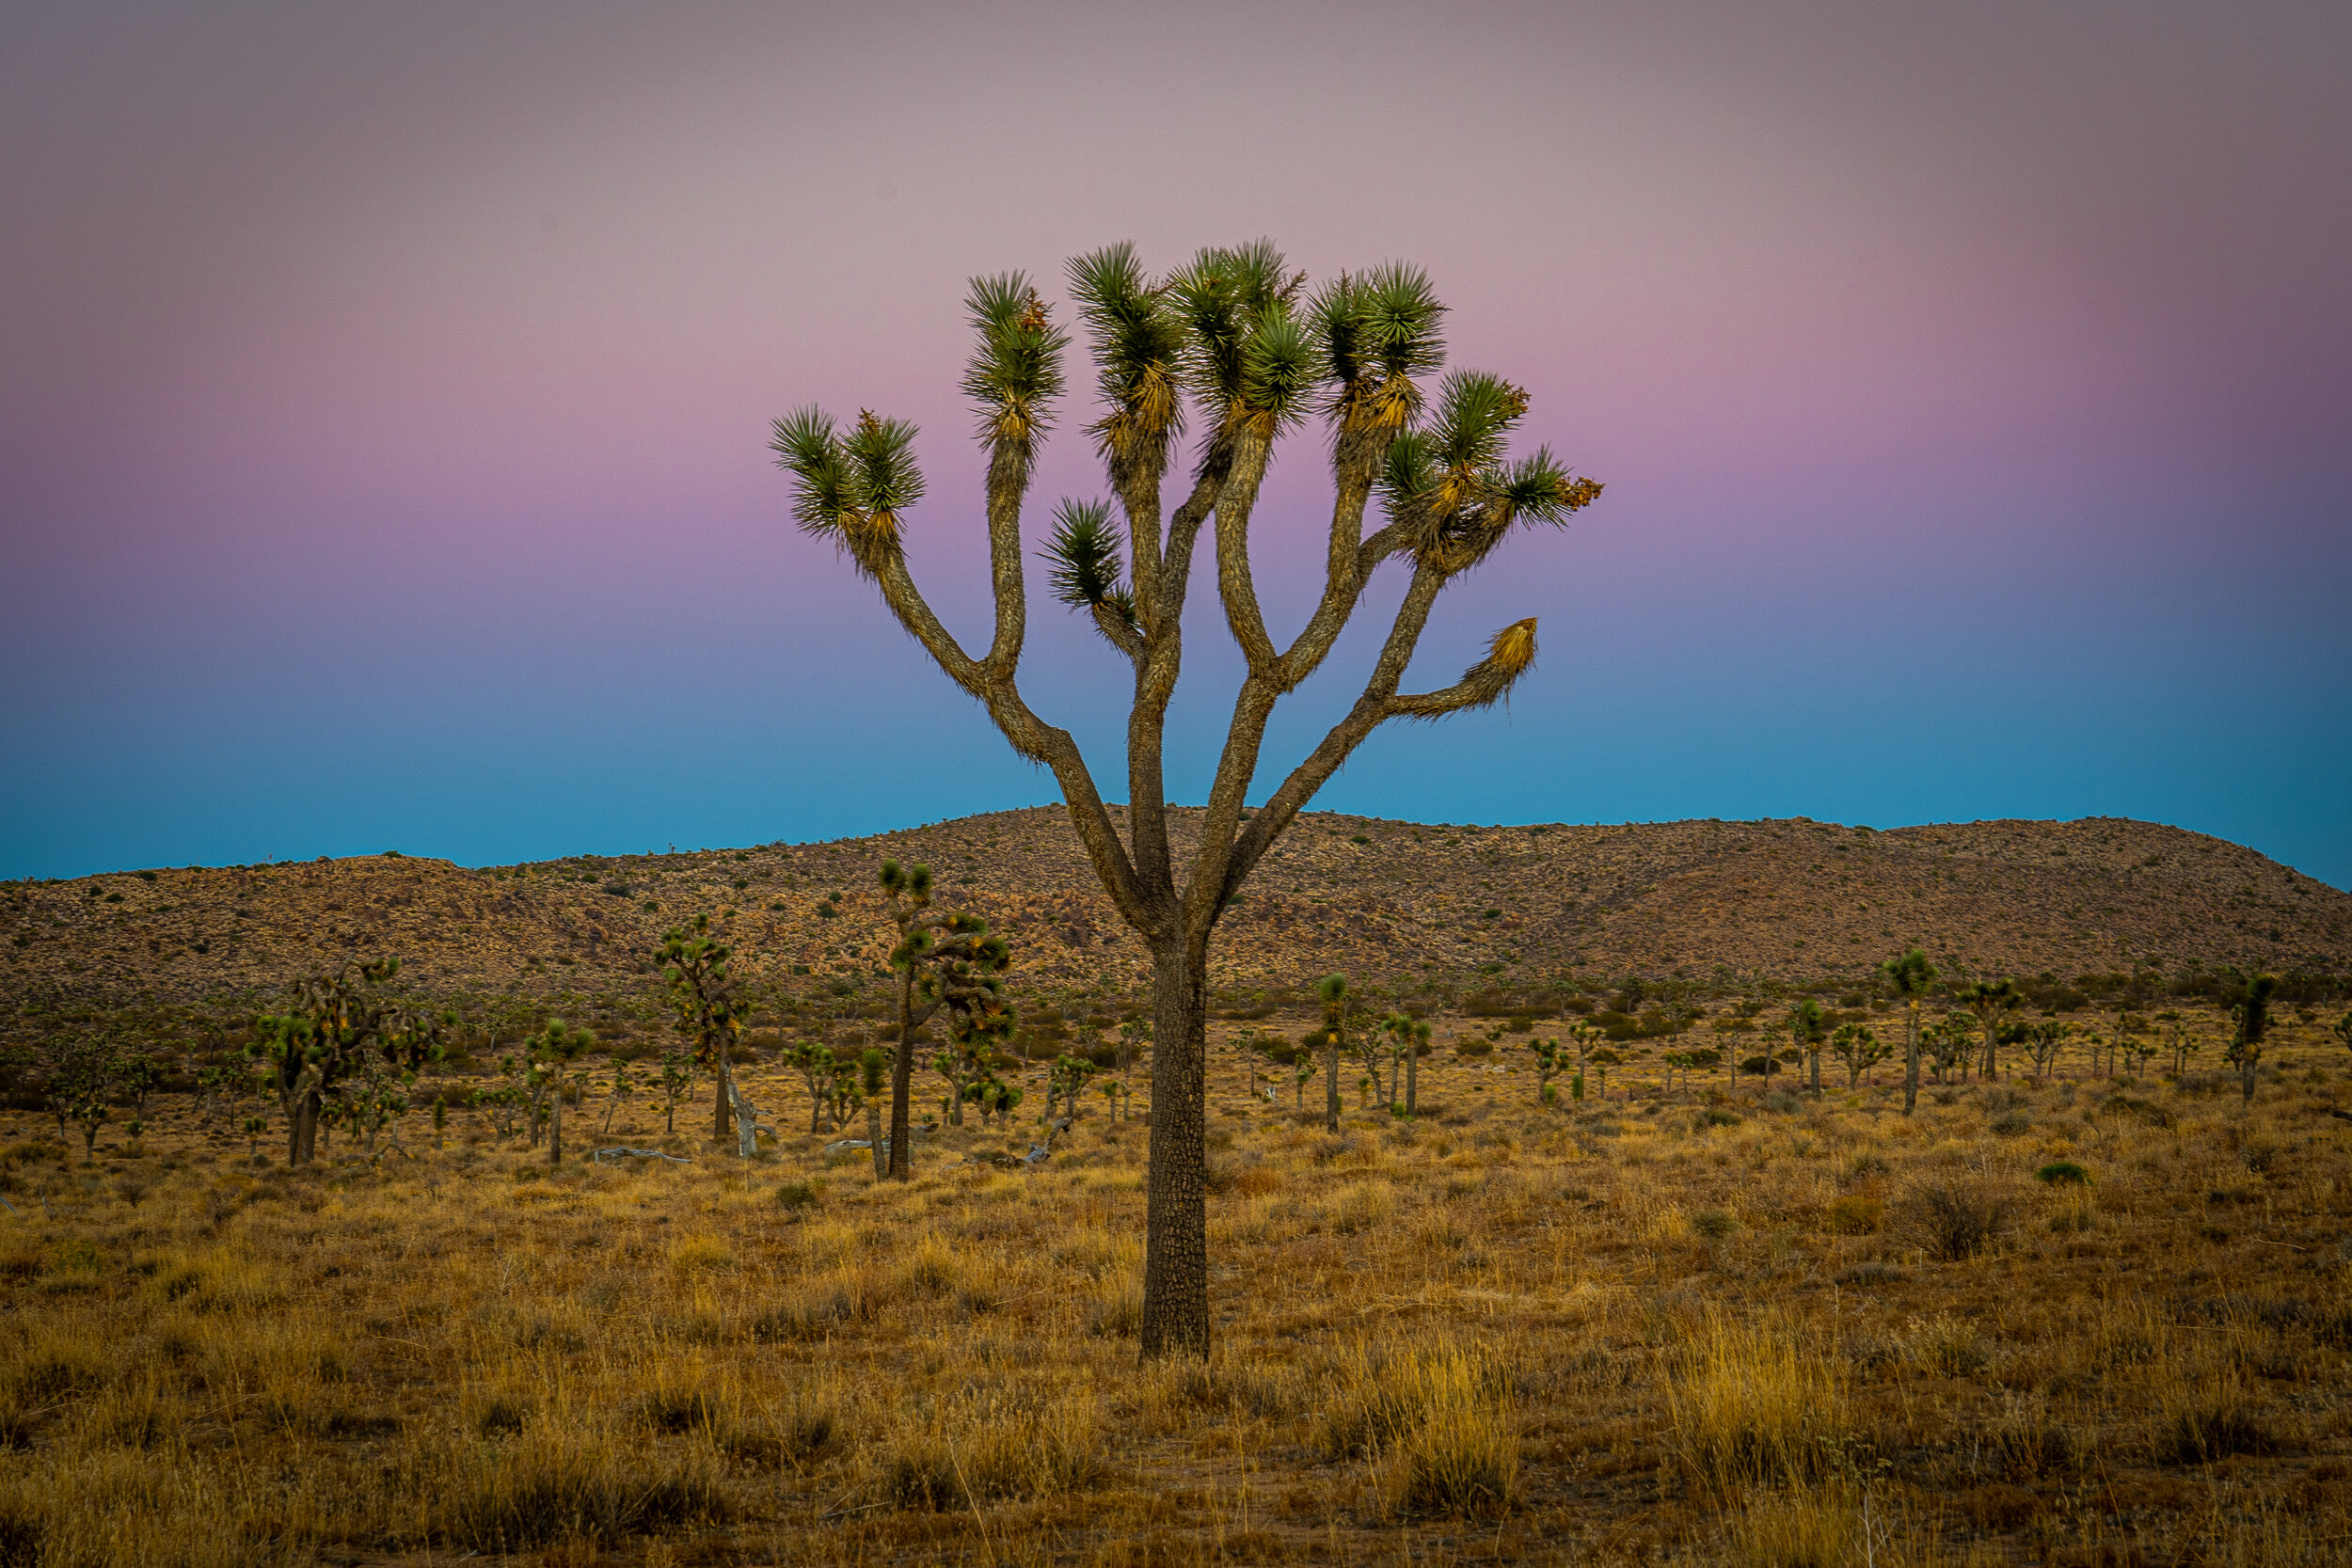  Joshua trees were named so by early Mormon settlers because they look as though all arms are stretching to heaven, as referenced in a story in the Bible. Joshua, Moses’ successor, succeeded in battle as long as Moses’ hands were raised toward God.  